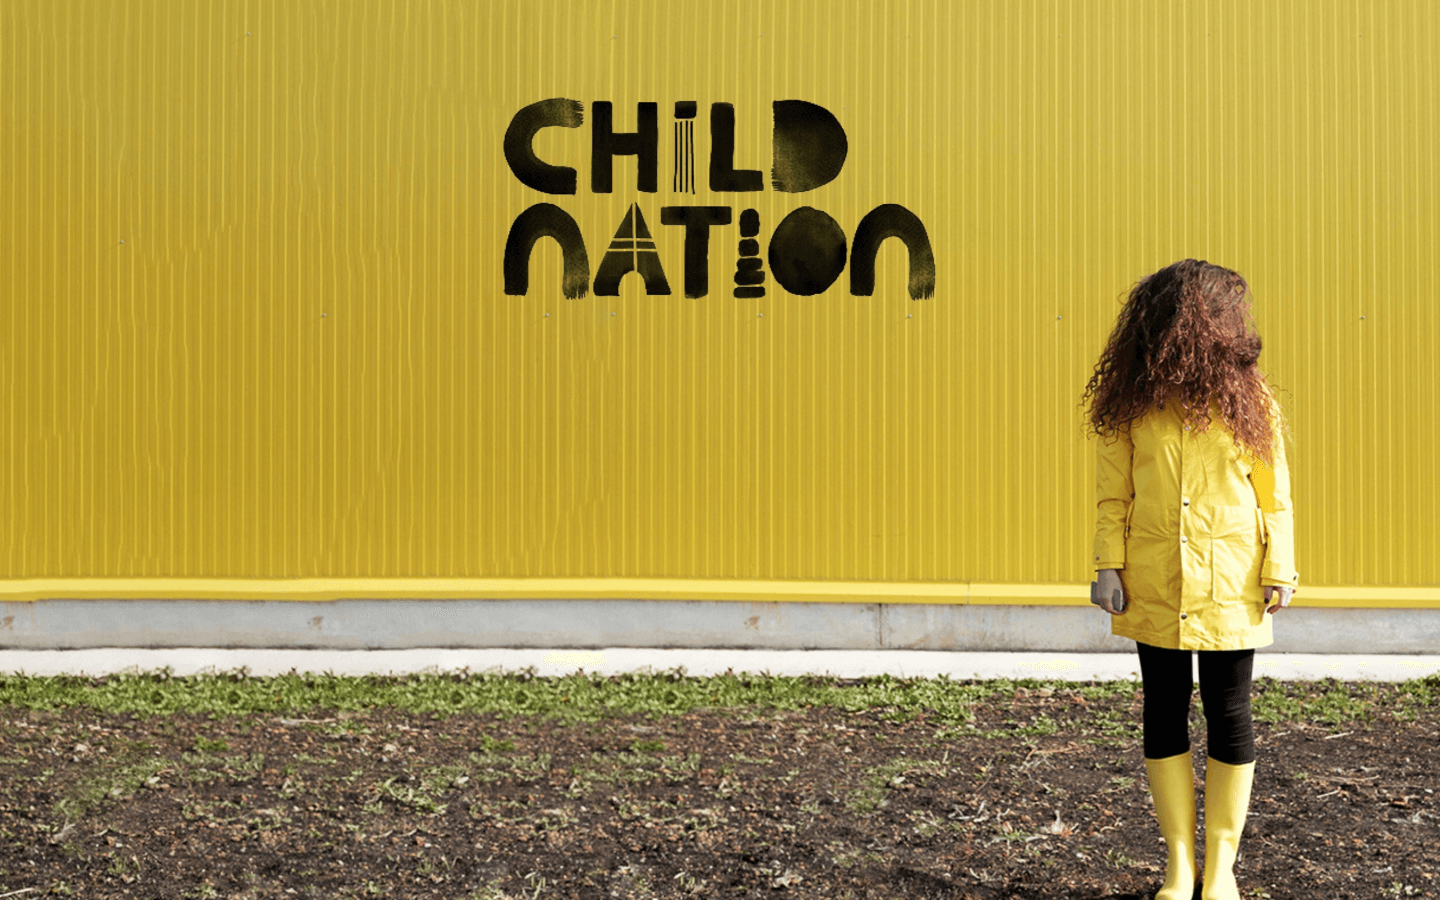 a child in a yellow rain coat and boots, standing in front of a yellow wall which has Child Nation written on it.